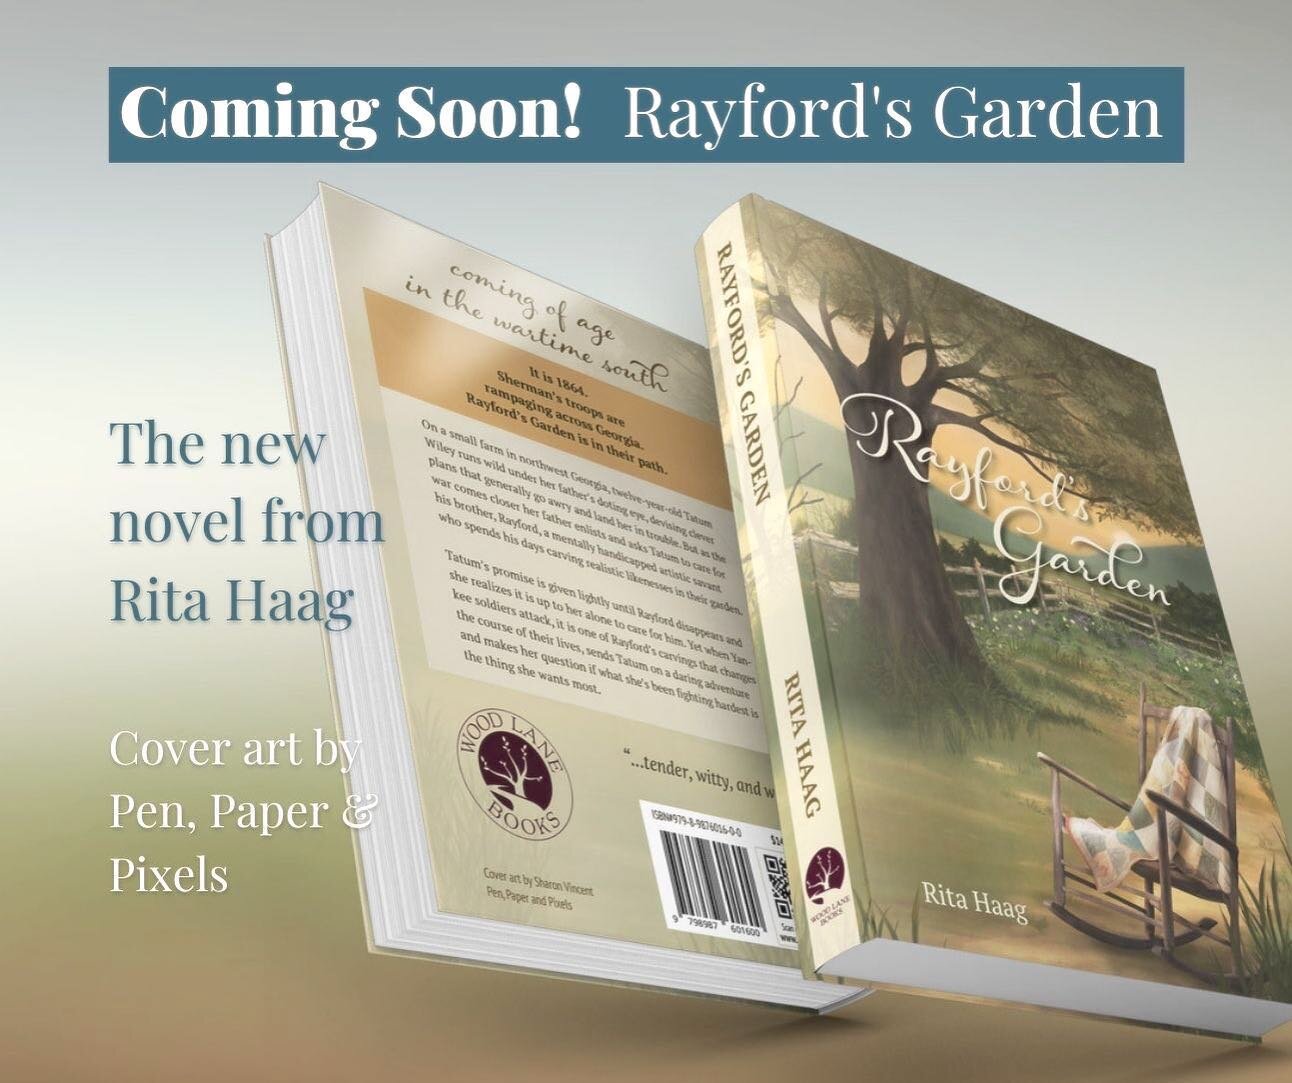 📚 New book cover artwork completed for &quot;Rayford's Garden&quot; ... a new novel from Rita Haag! It's been an adventure working on this project and I can't wait until the final product is printed and ready for sale!
✨ 
Digital artwork on the cove